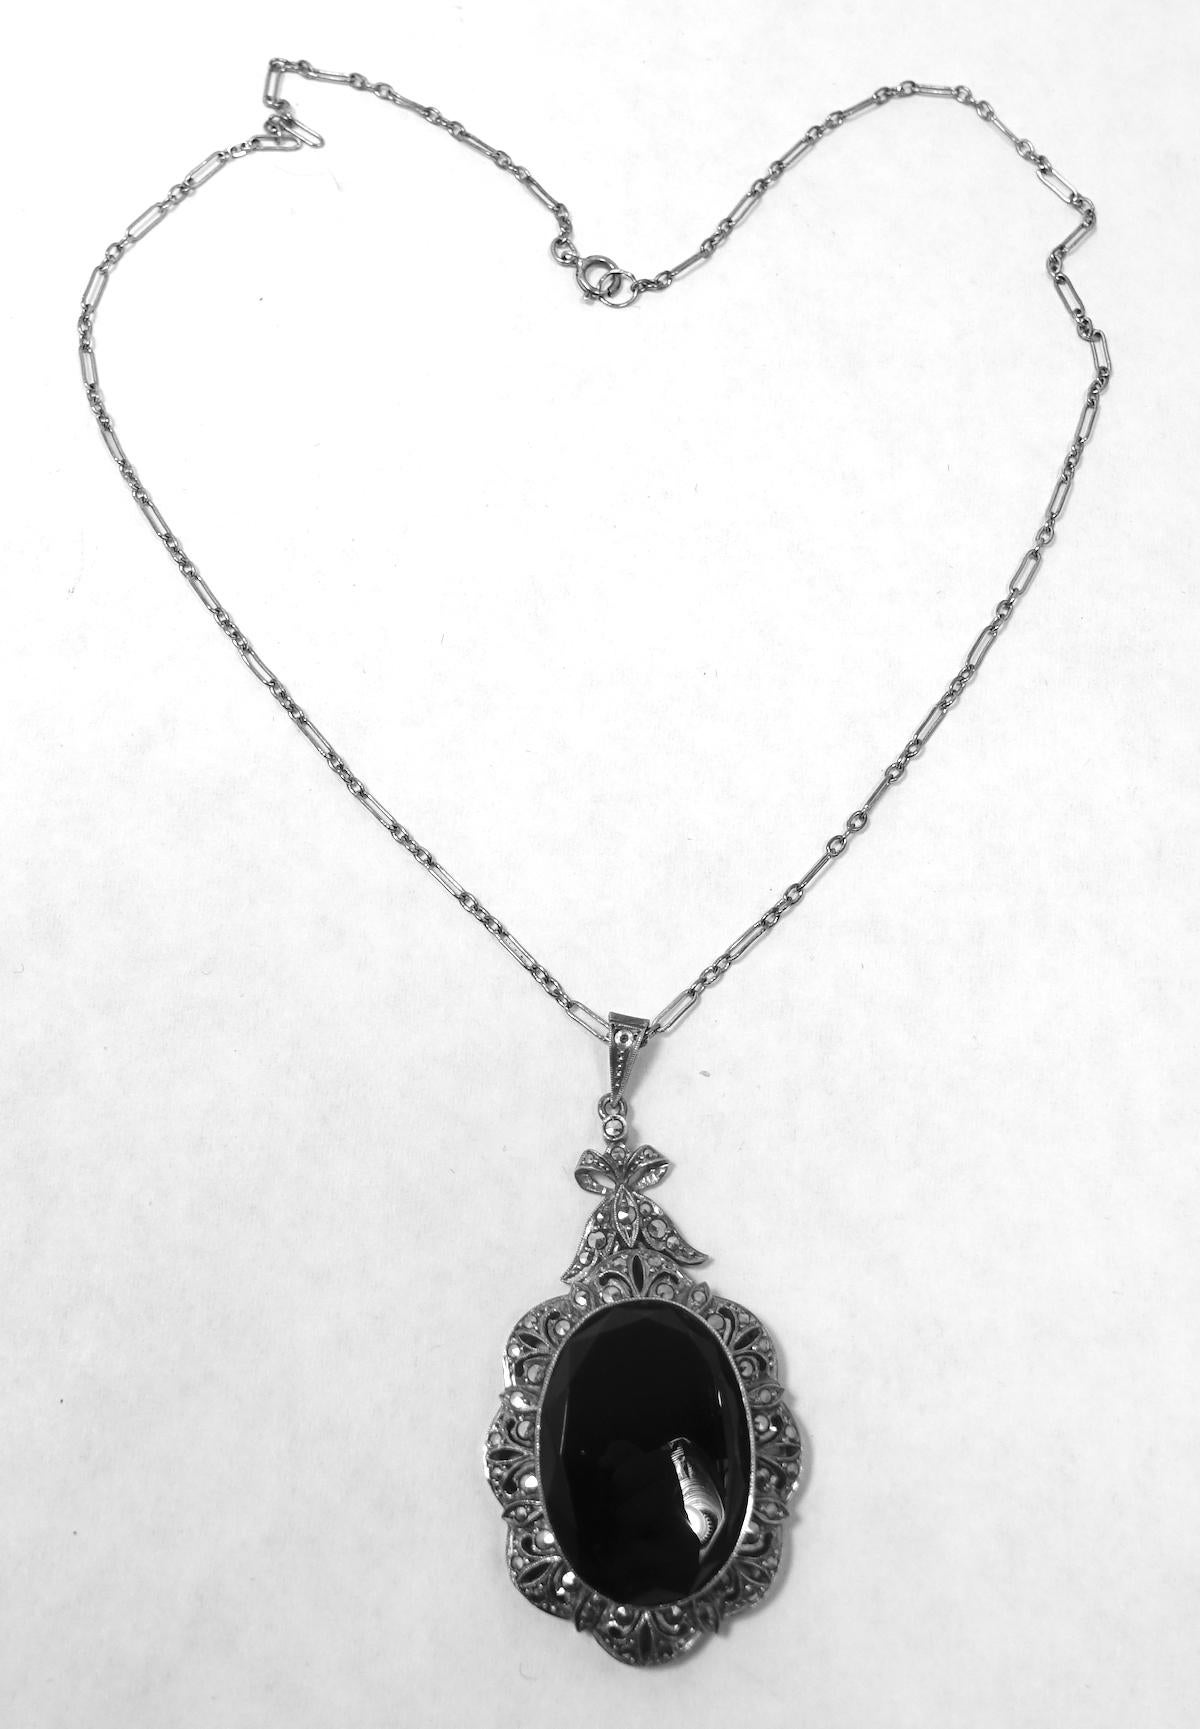 This vintage deco necklace features an oval pendant with onyx and marcasites in a sterling silver setting.  In excellent condition, the oval pendant measures 2-1/8” x 1-1/8”; the sterling link chain is 15-1/2” x 1/16” with a spring back clasp.